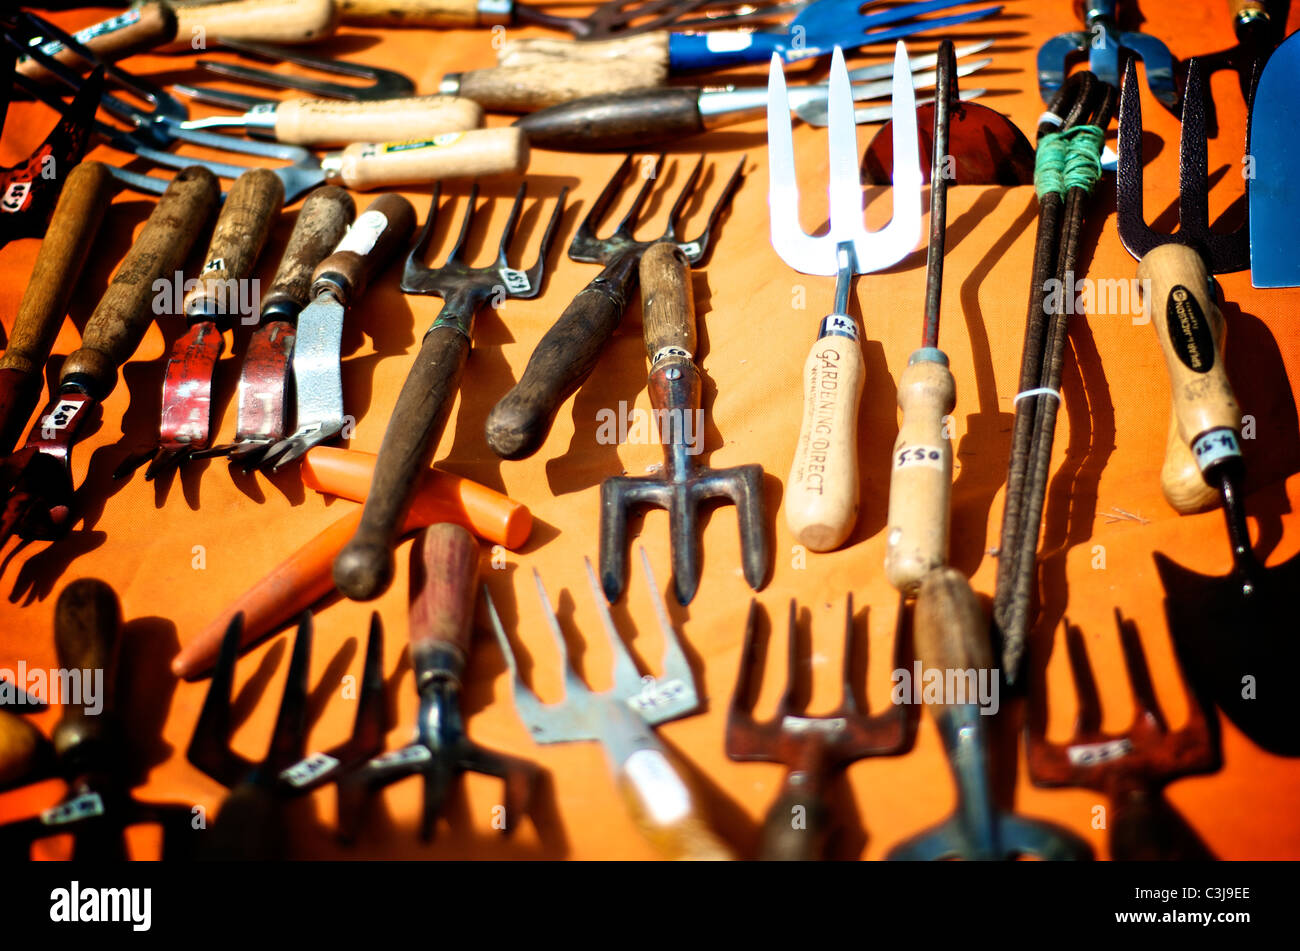 Vintage Garden Tools on colourful background Stock Photo